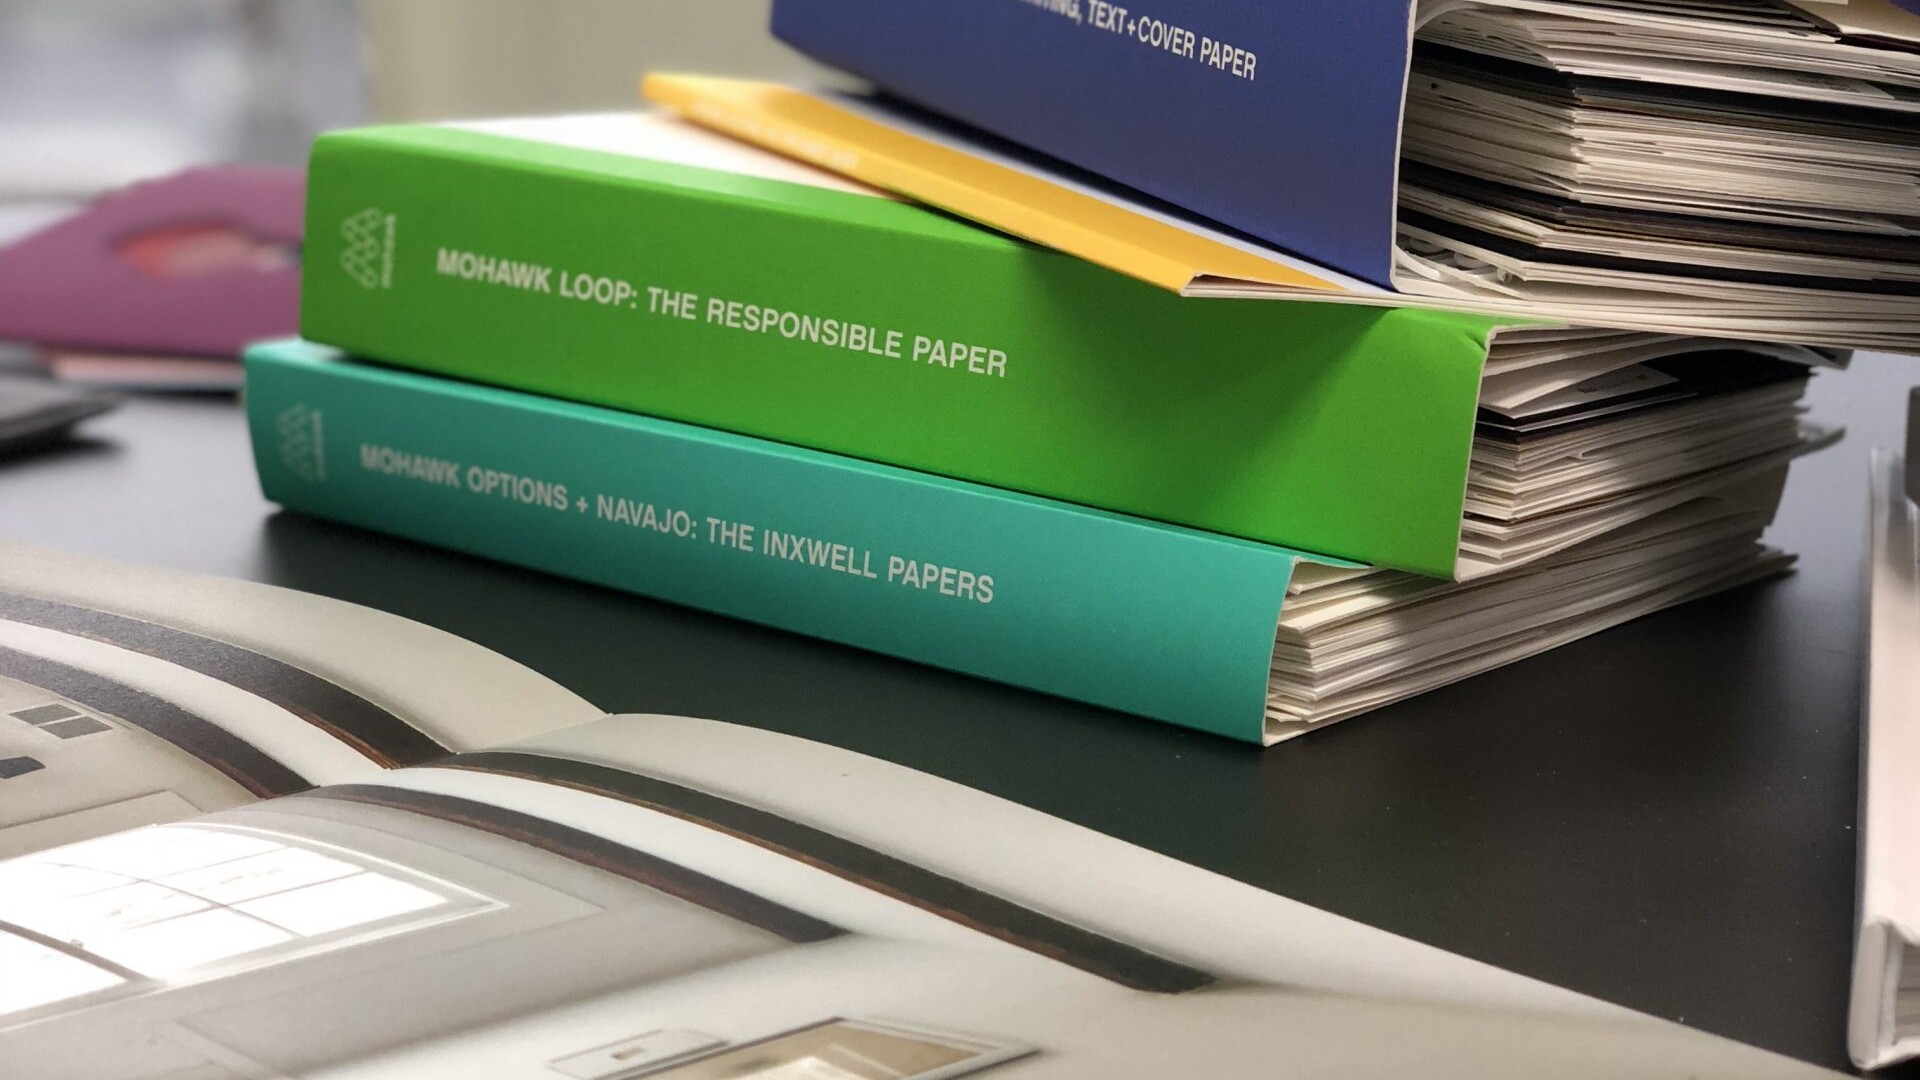 A stack of binders sit on a desk.